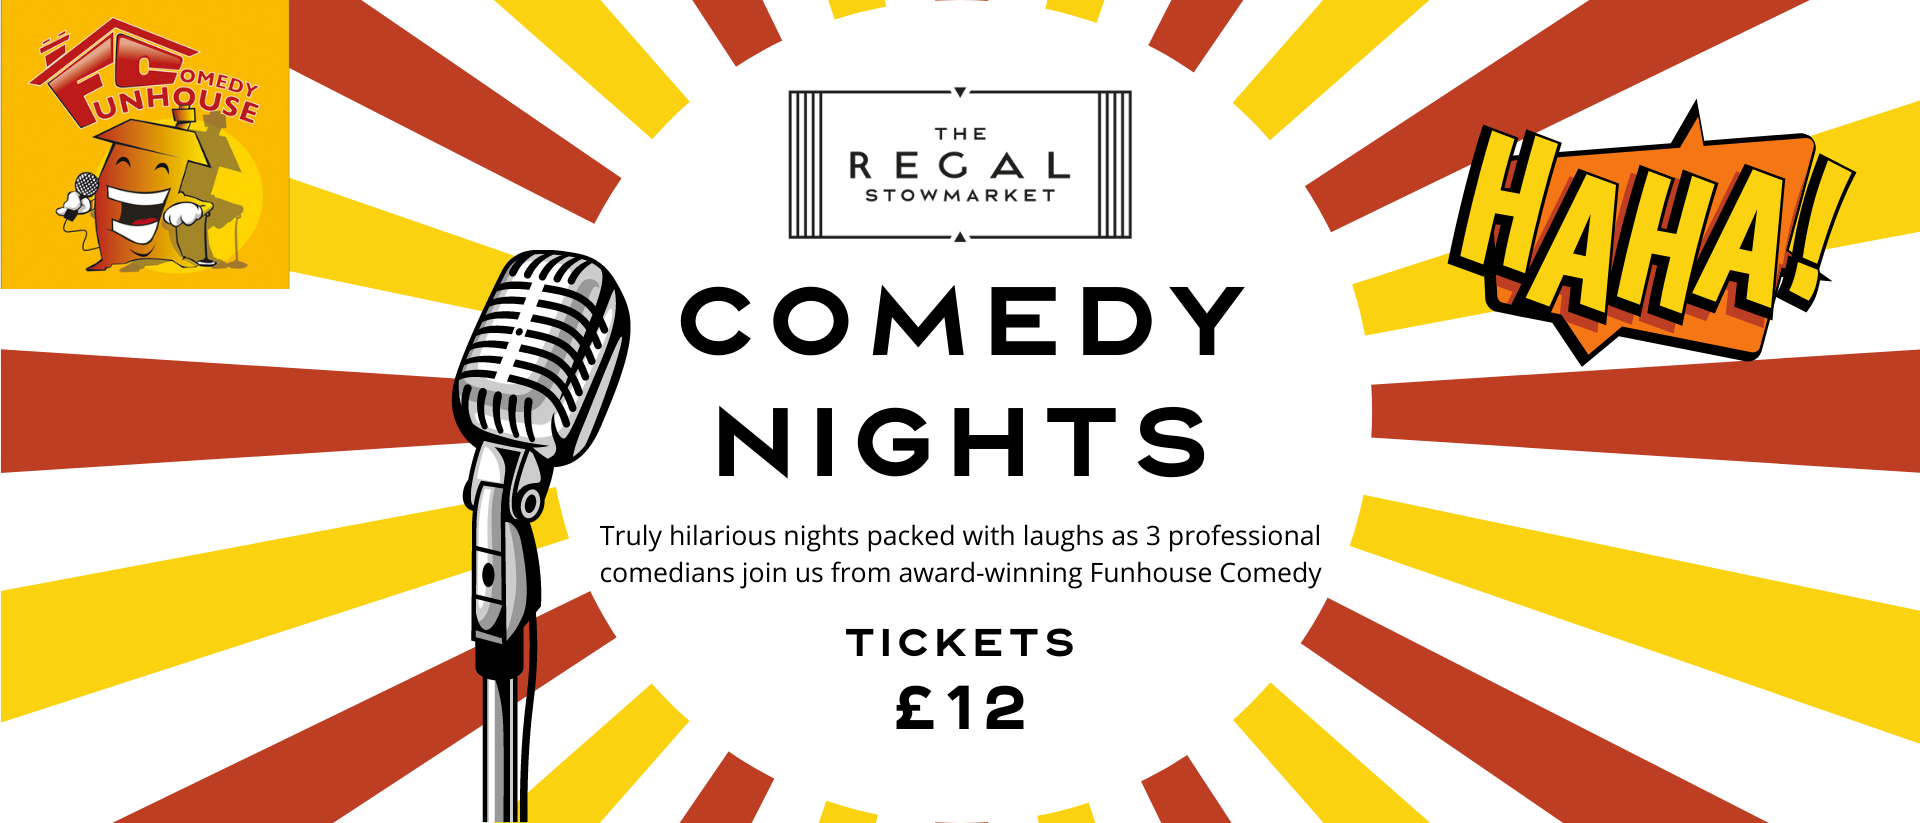 Comedy Nights at The Regal